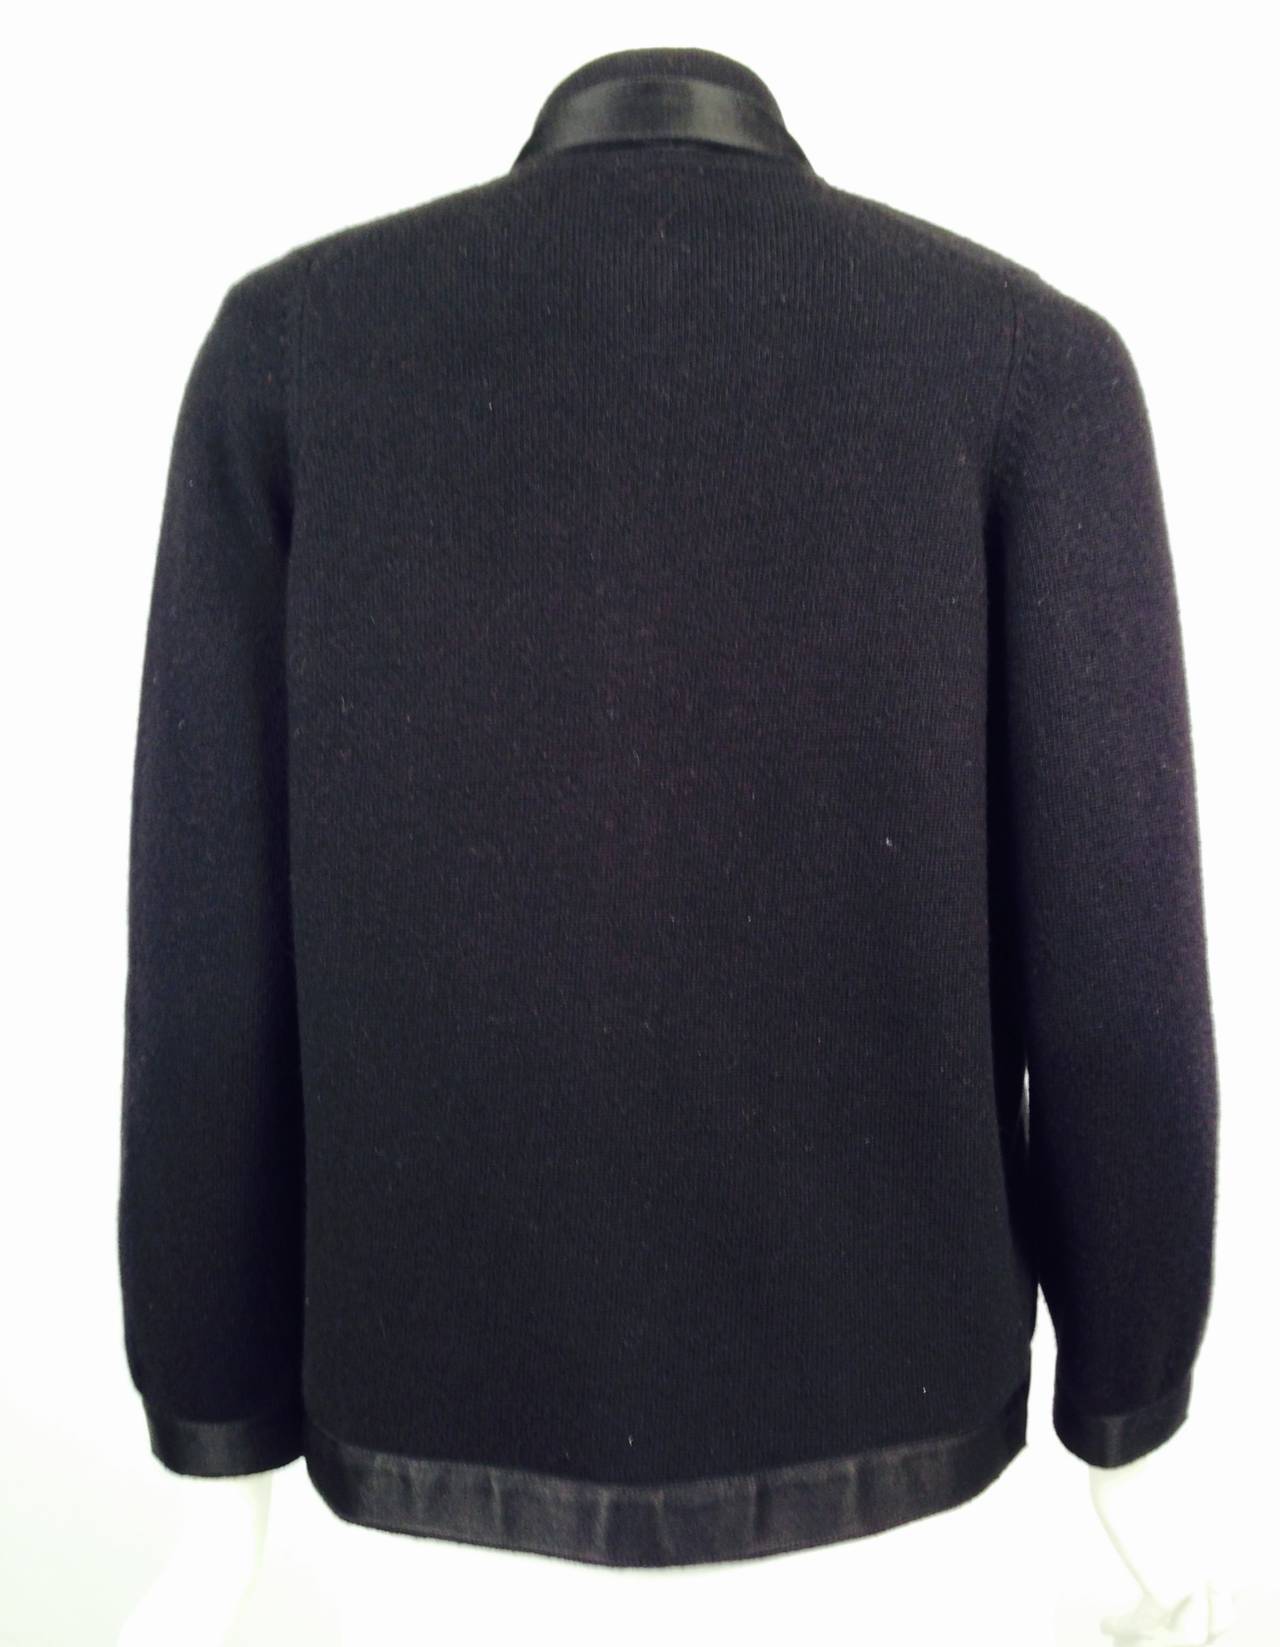 1990s Chanel Cashmere Black Sweater With Satin Ribbon Trim is quintessential 